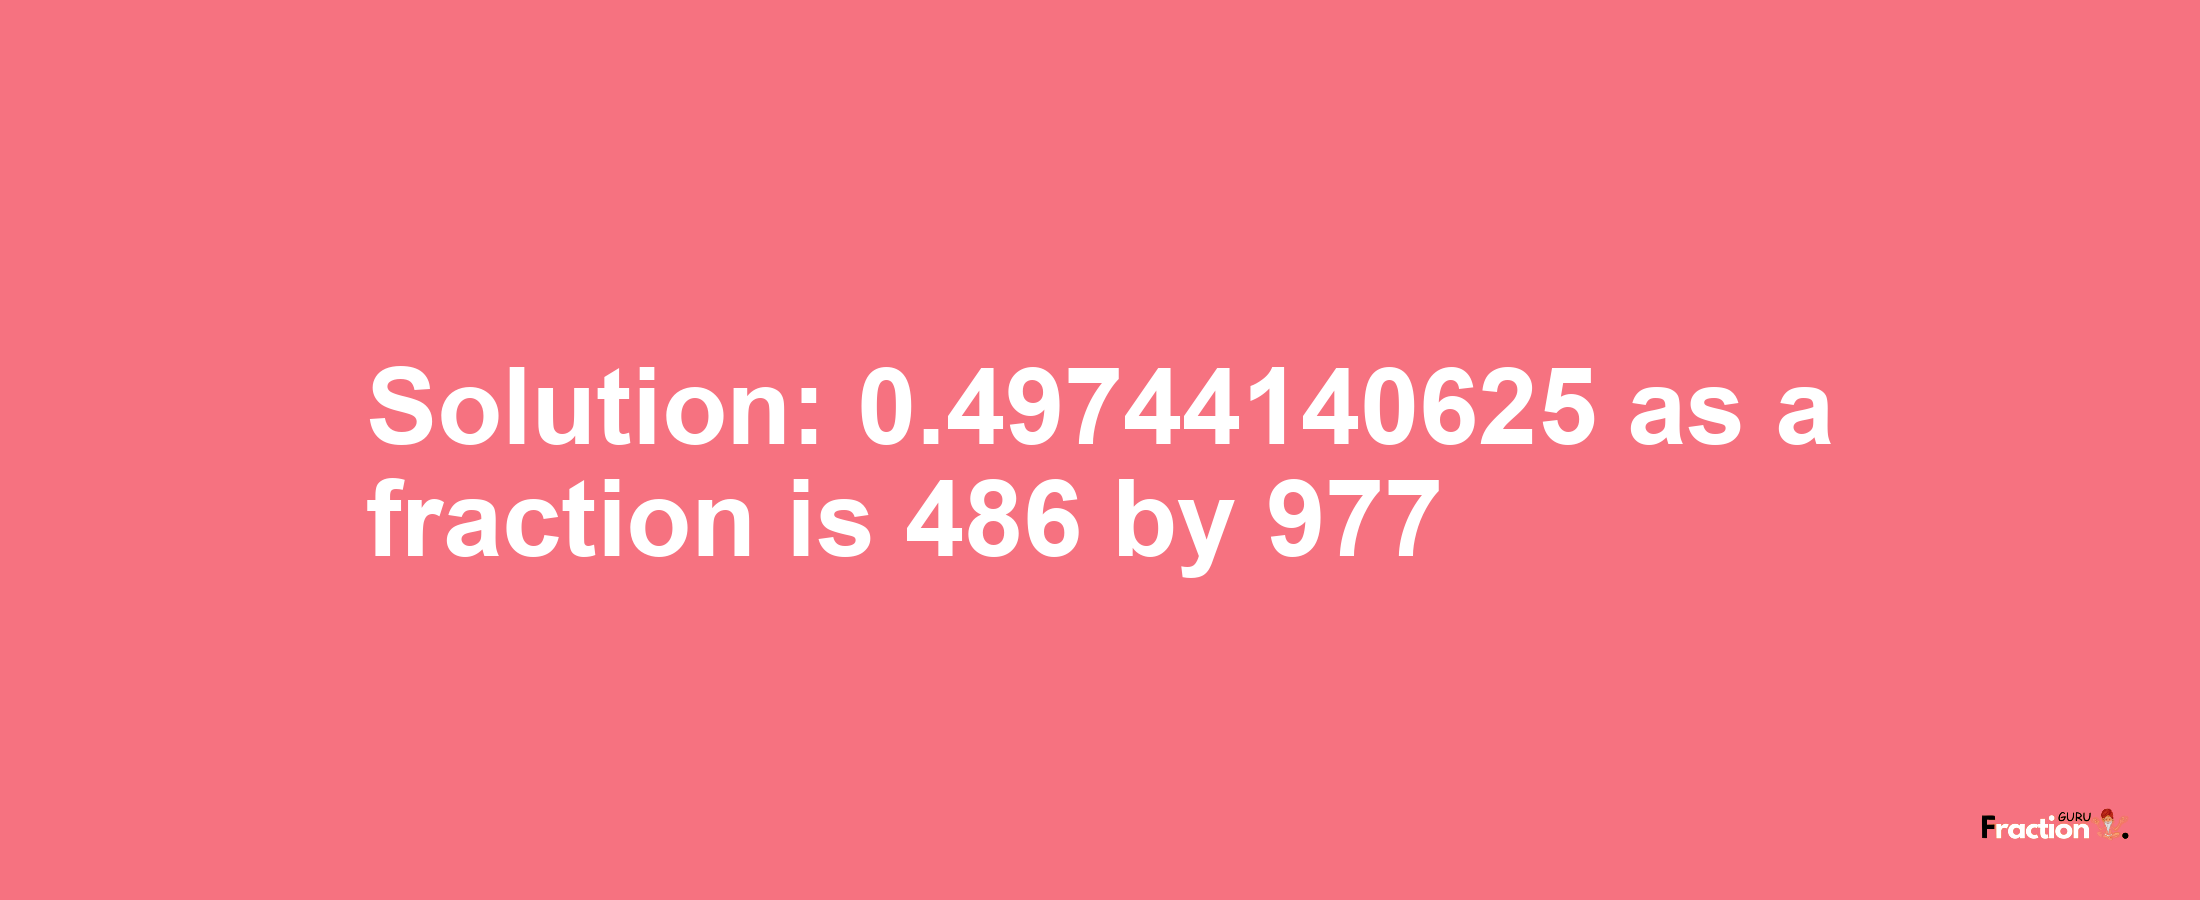 Solution:0.49744140625 as a fraction is 486/977